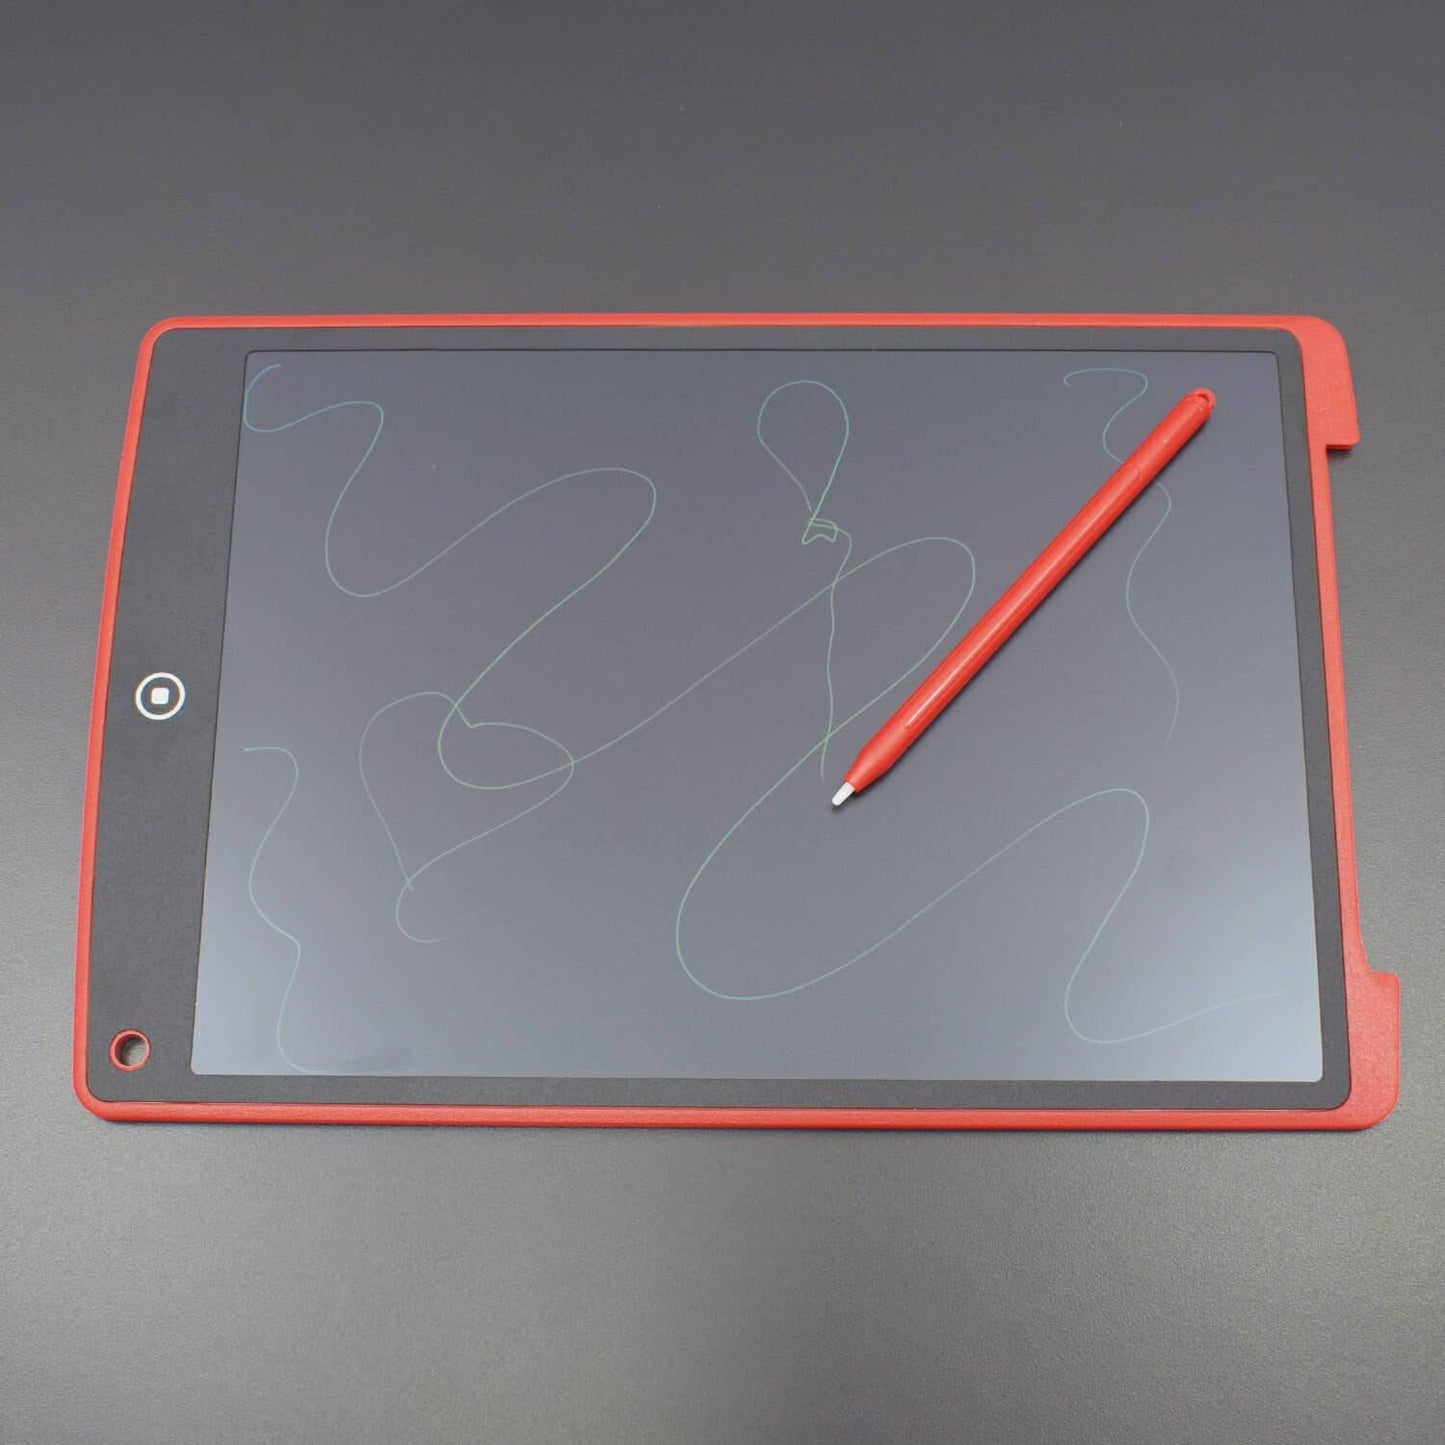 LCD Writing Tablet 12 Inch Electronic Drawing Board Digital Doodle Pad with Erase Button - RS1745 - REES52